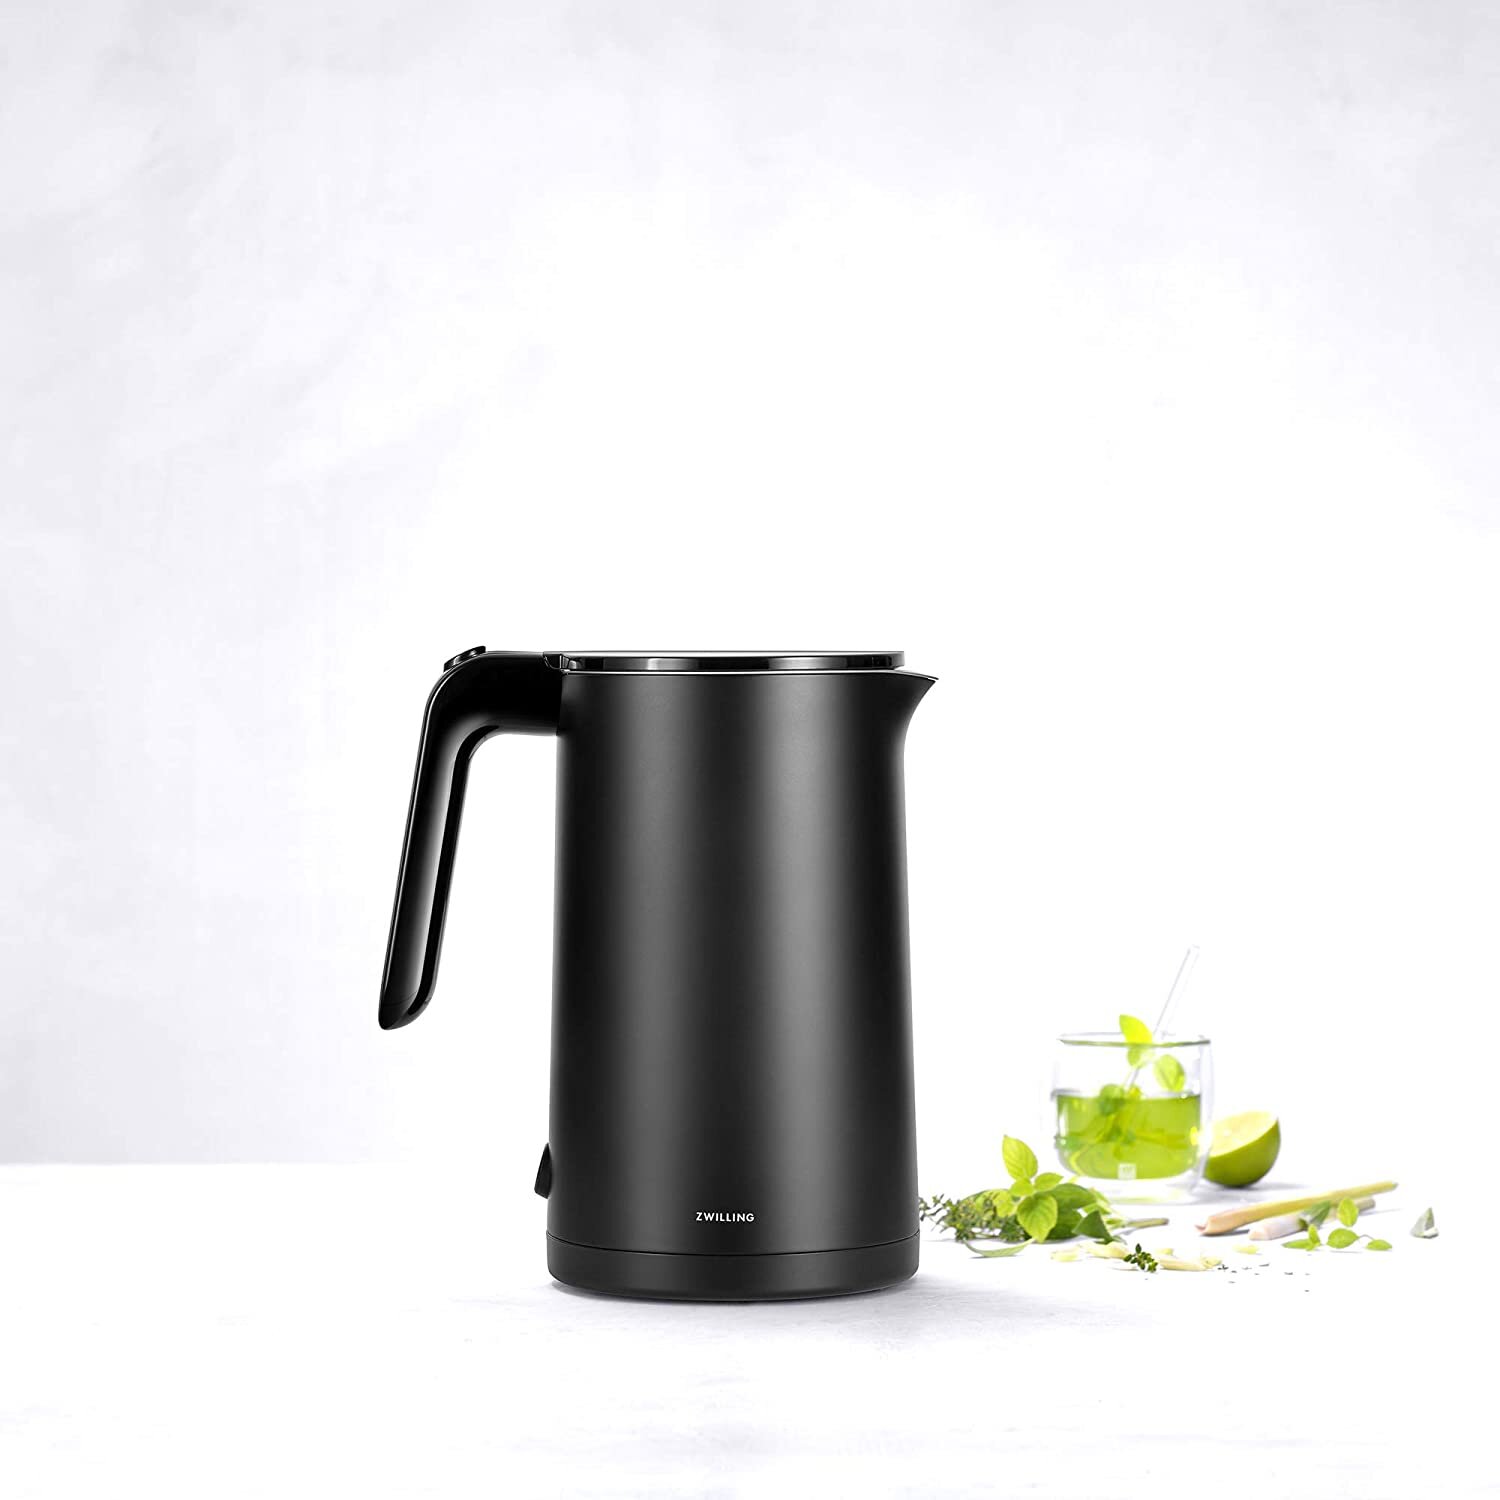 Zwilling - Enfinigy Cool Touch Kettle (Black)